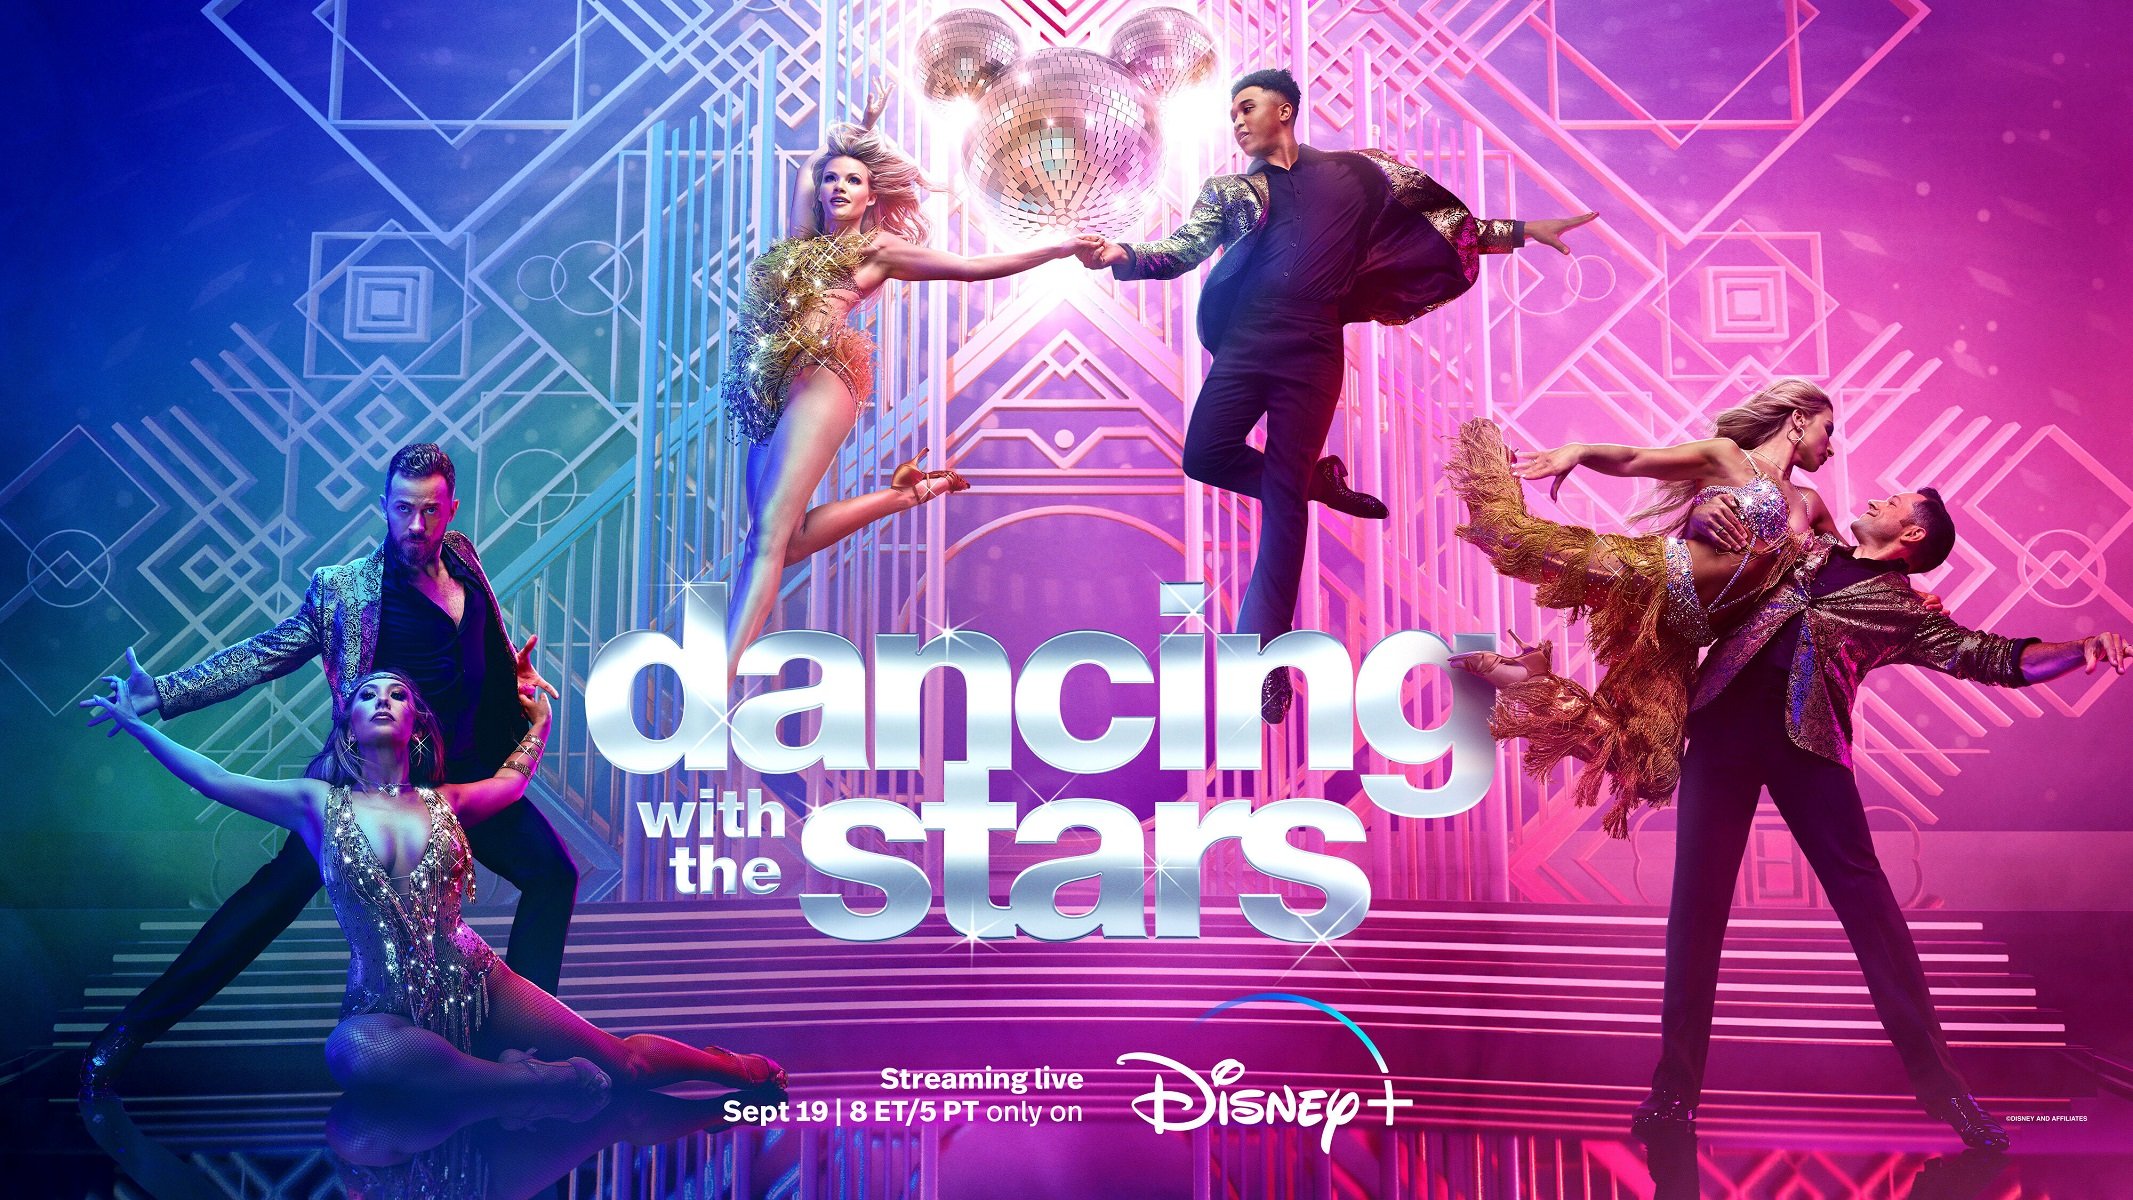 'Dancing with the Stars' Season 31 What Time Does It Air on Disney+ in